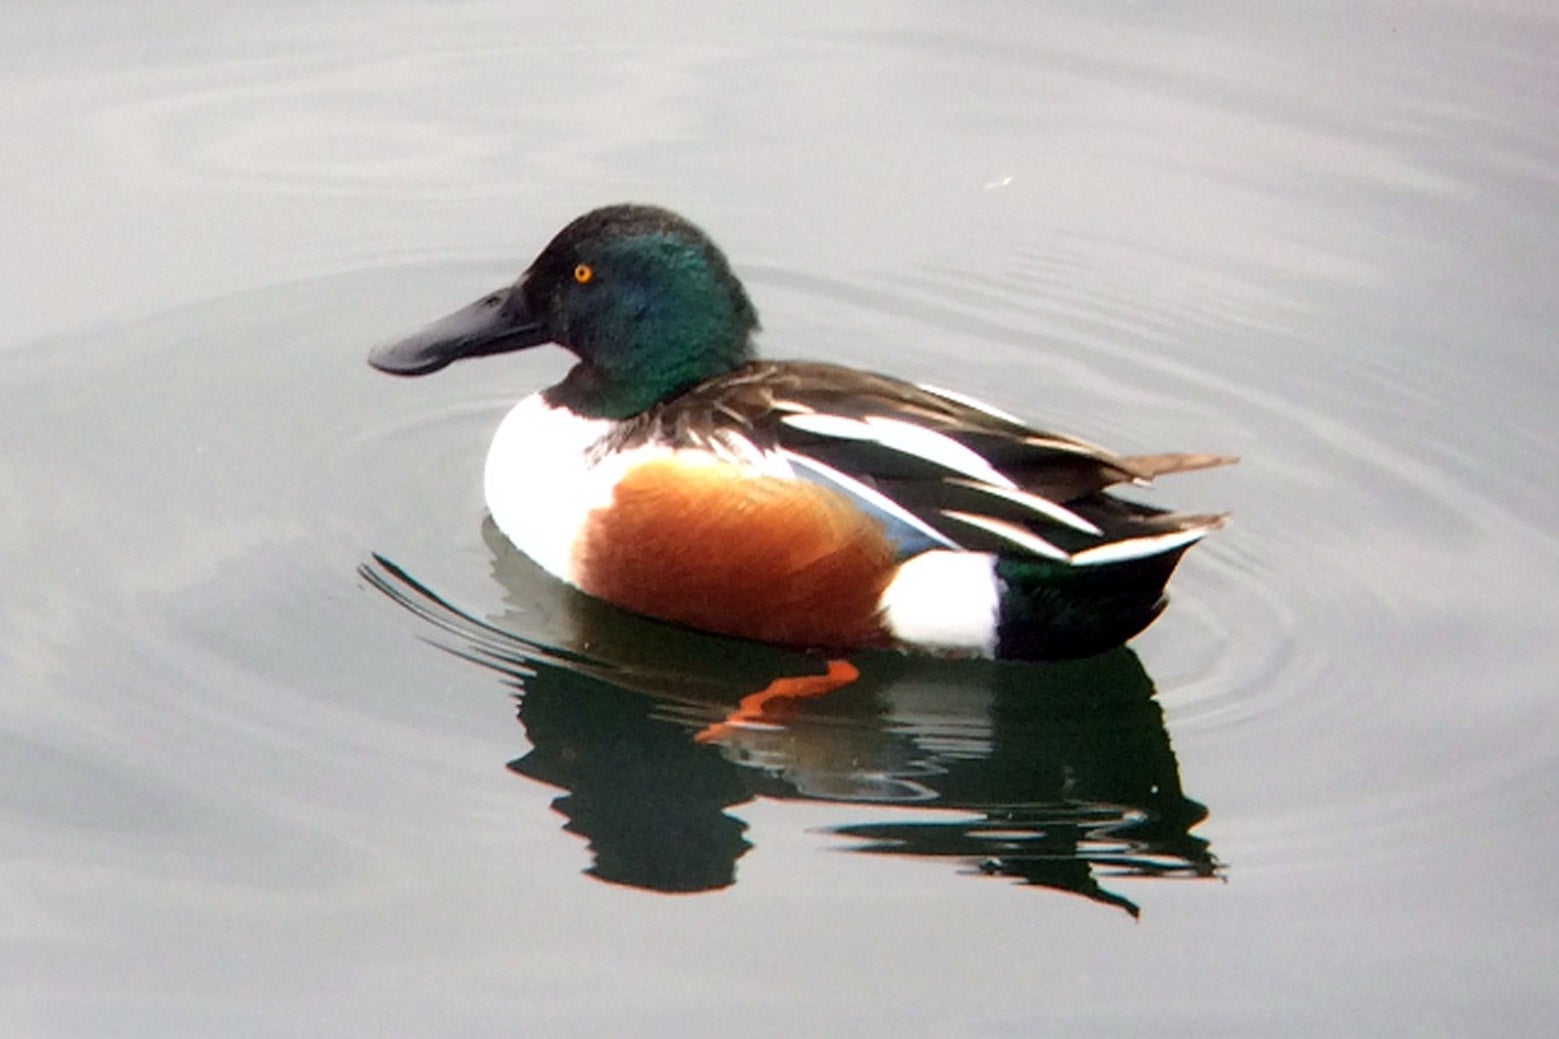 A northern shoveler duck on the water.